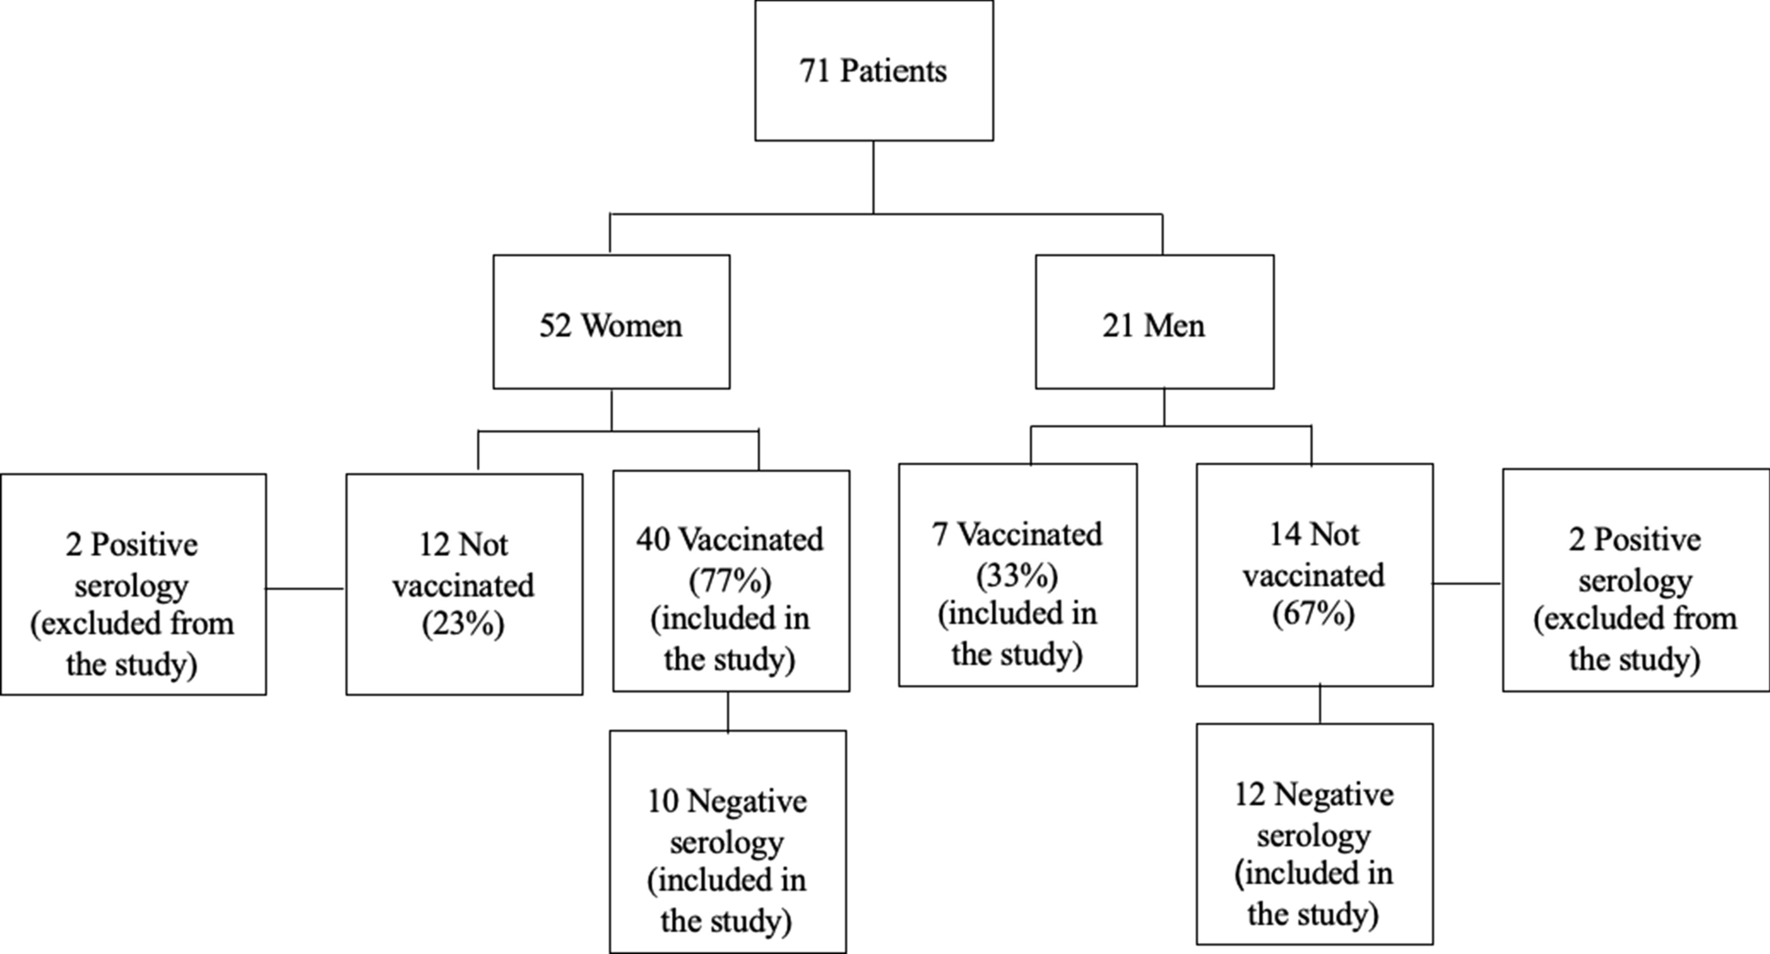 Does the SARS-CoV-2 mRNA vaccine and its serum IgG levels affect fertility treatments and obstetric outcomes? An observational cohort study